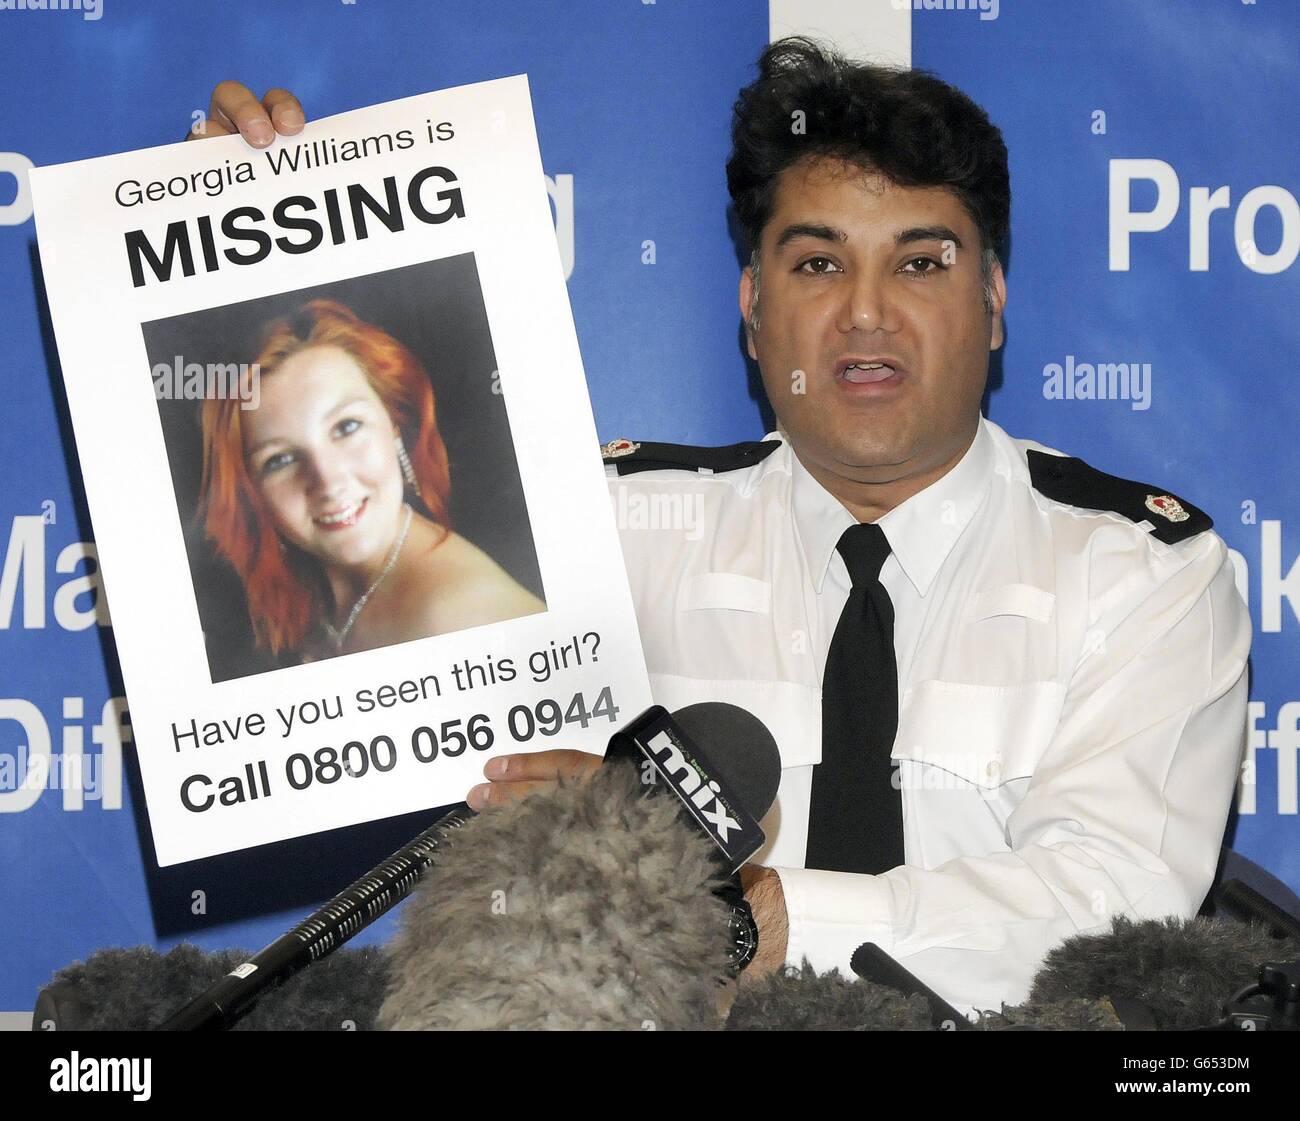 Police Superintendent Nav Malik from West Mercia Police holds up a poster of missing teenager Georgia Williams, 17, of Wellington in Shropshire, West Midlands, who has disappeared from her home. A man was arrested in Glasgow this morning on suspicion of kidnapping the girl who has yet to be traced. Stock Photo